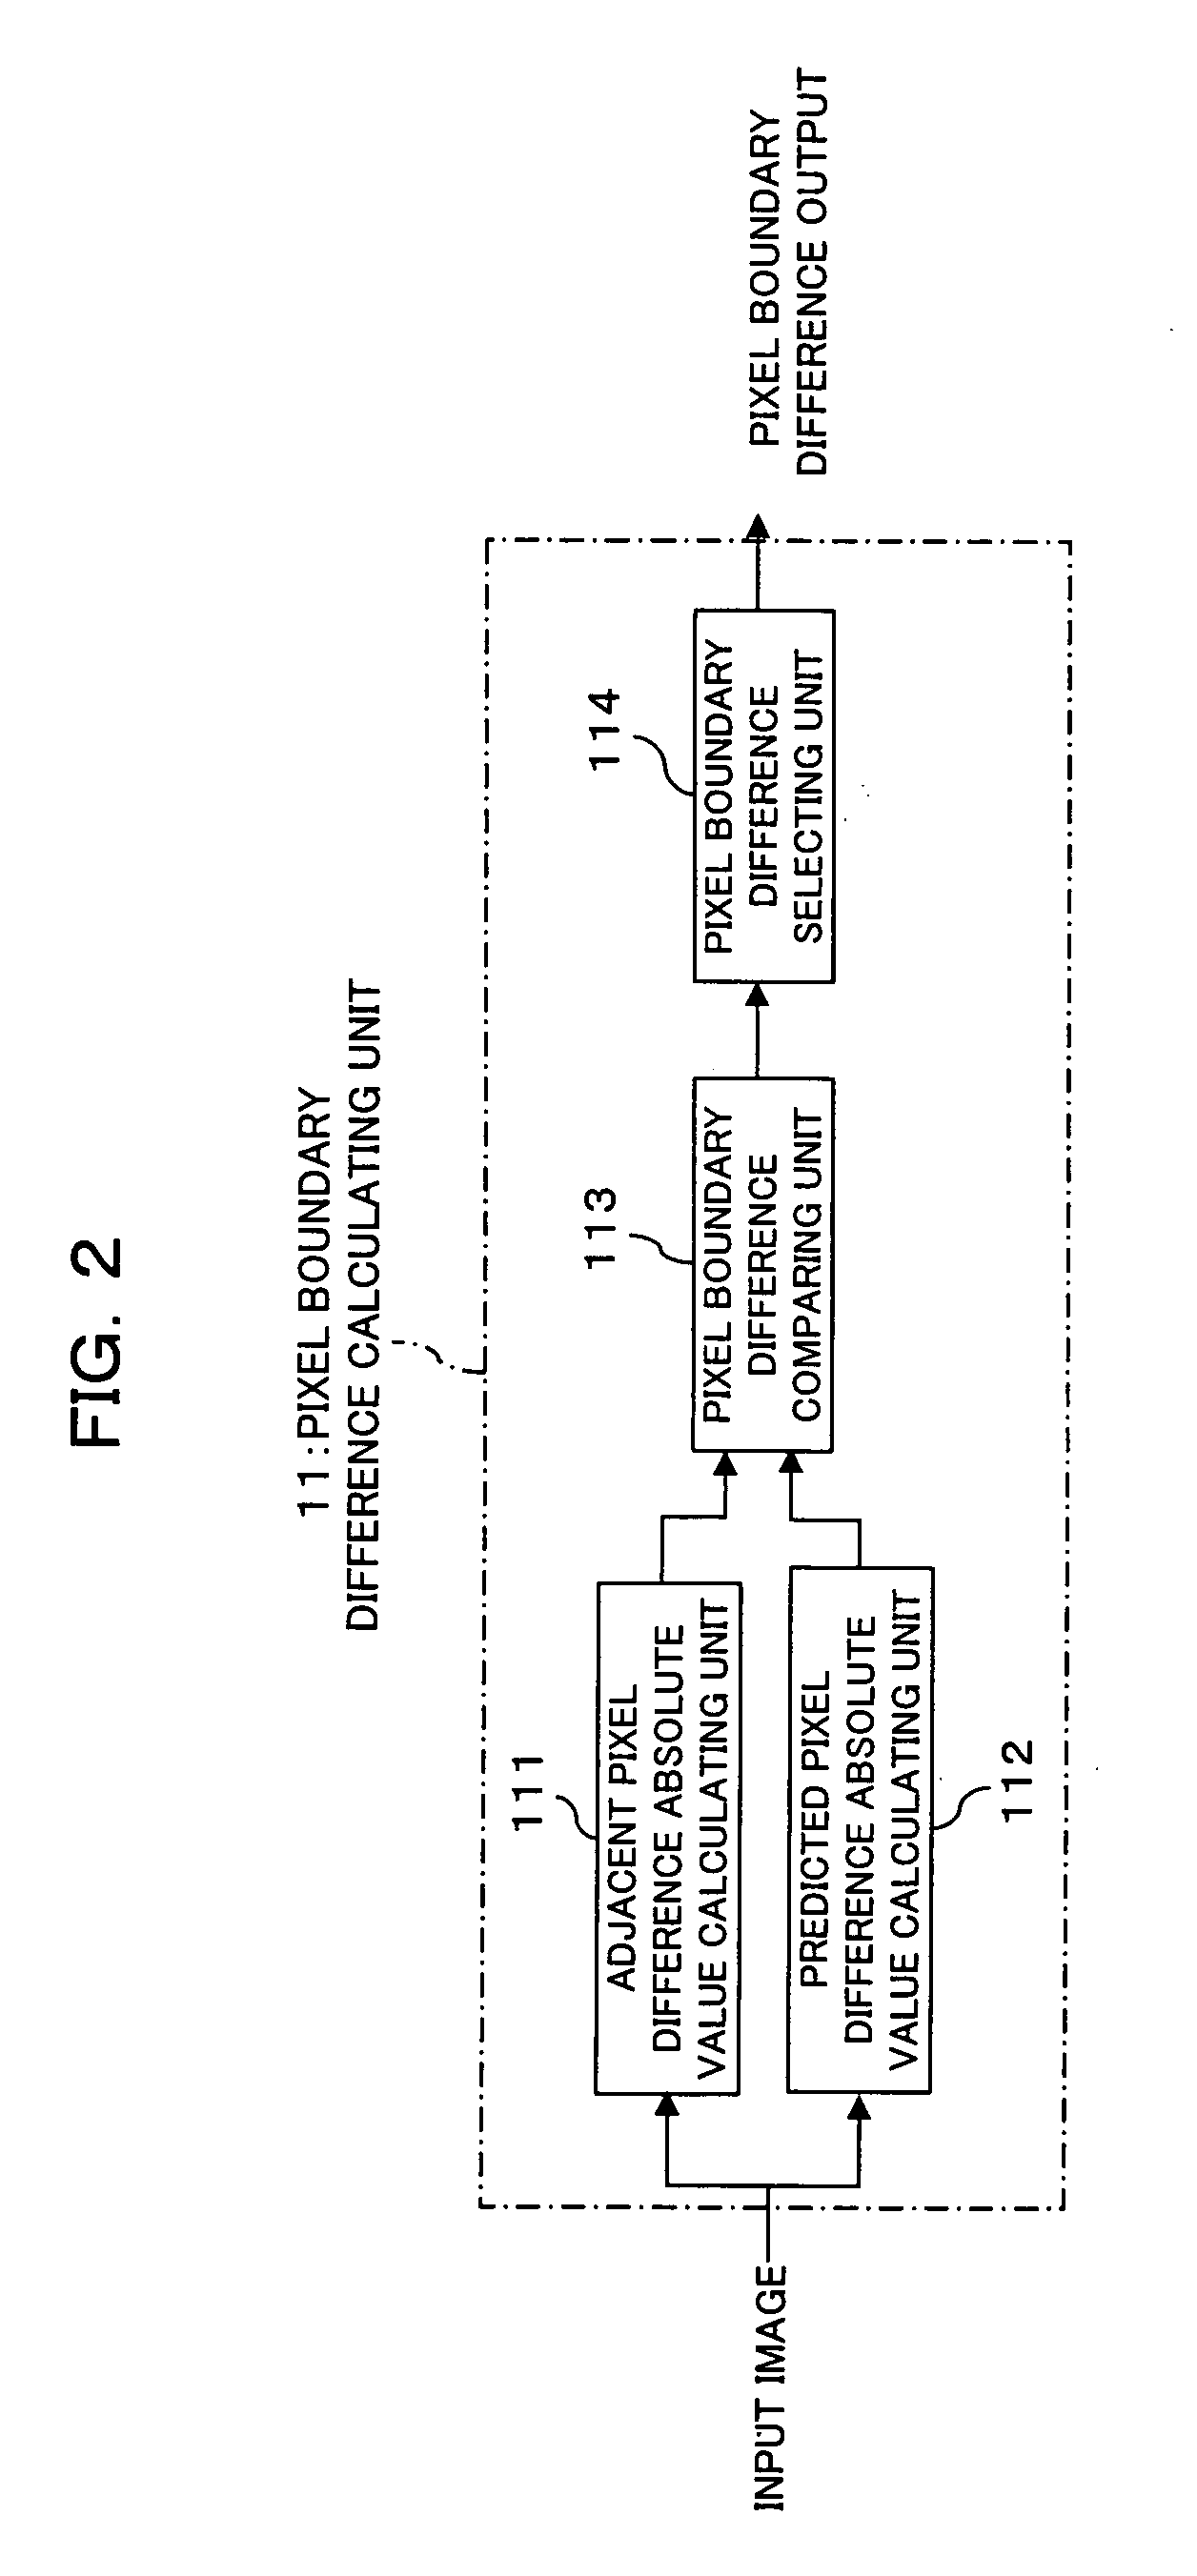 Block noise detecting method and apparatus, and block noise reducing method and apparatus